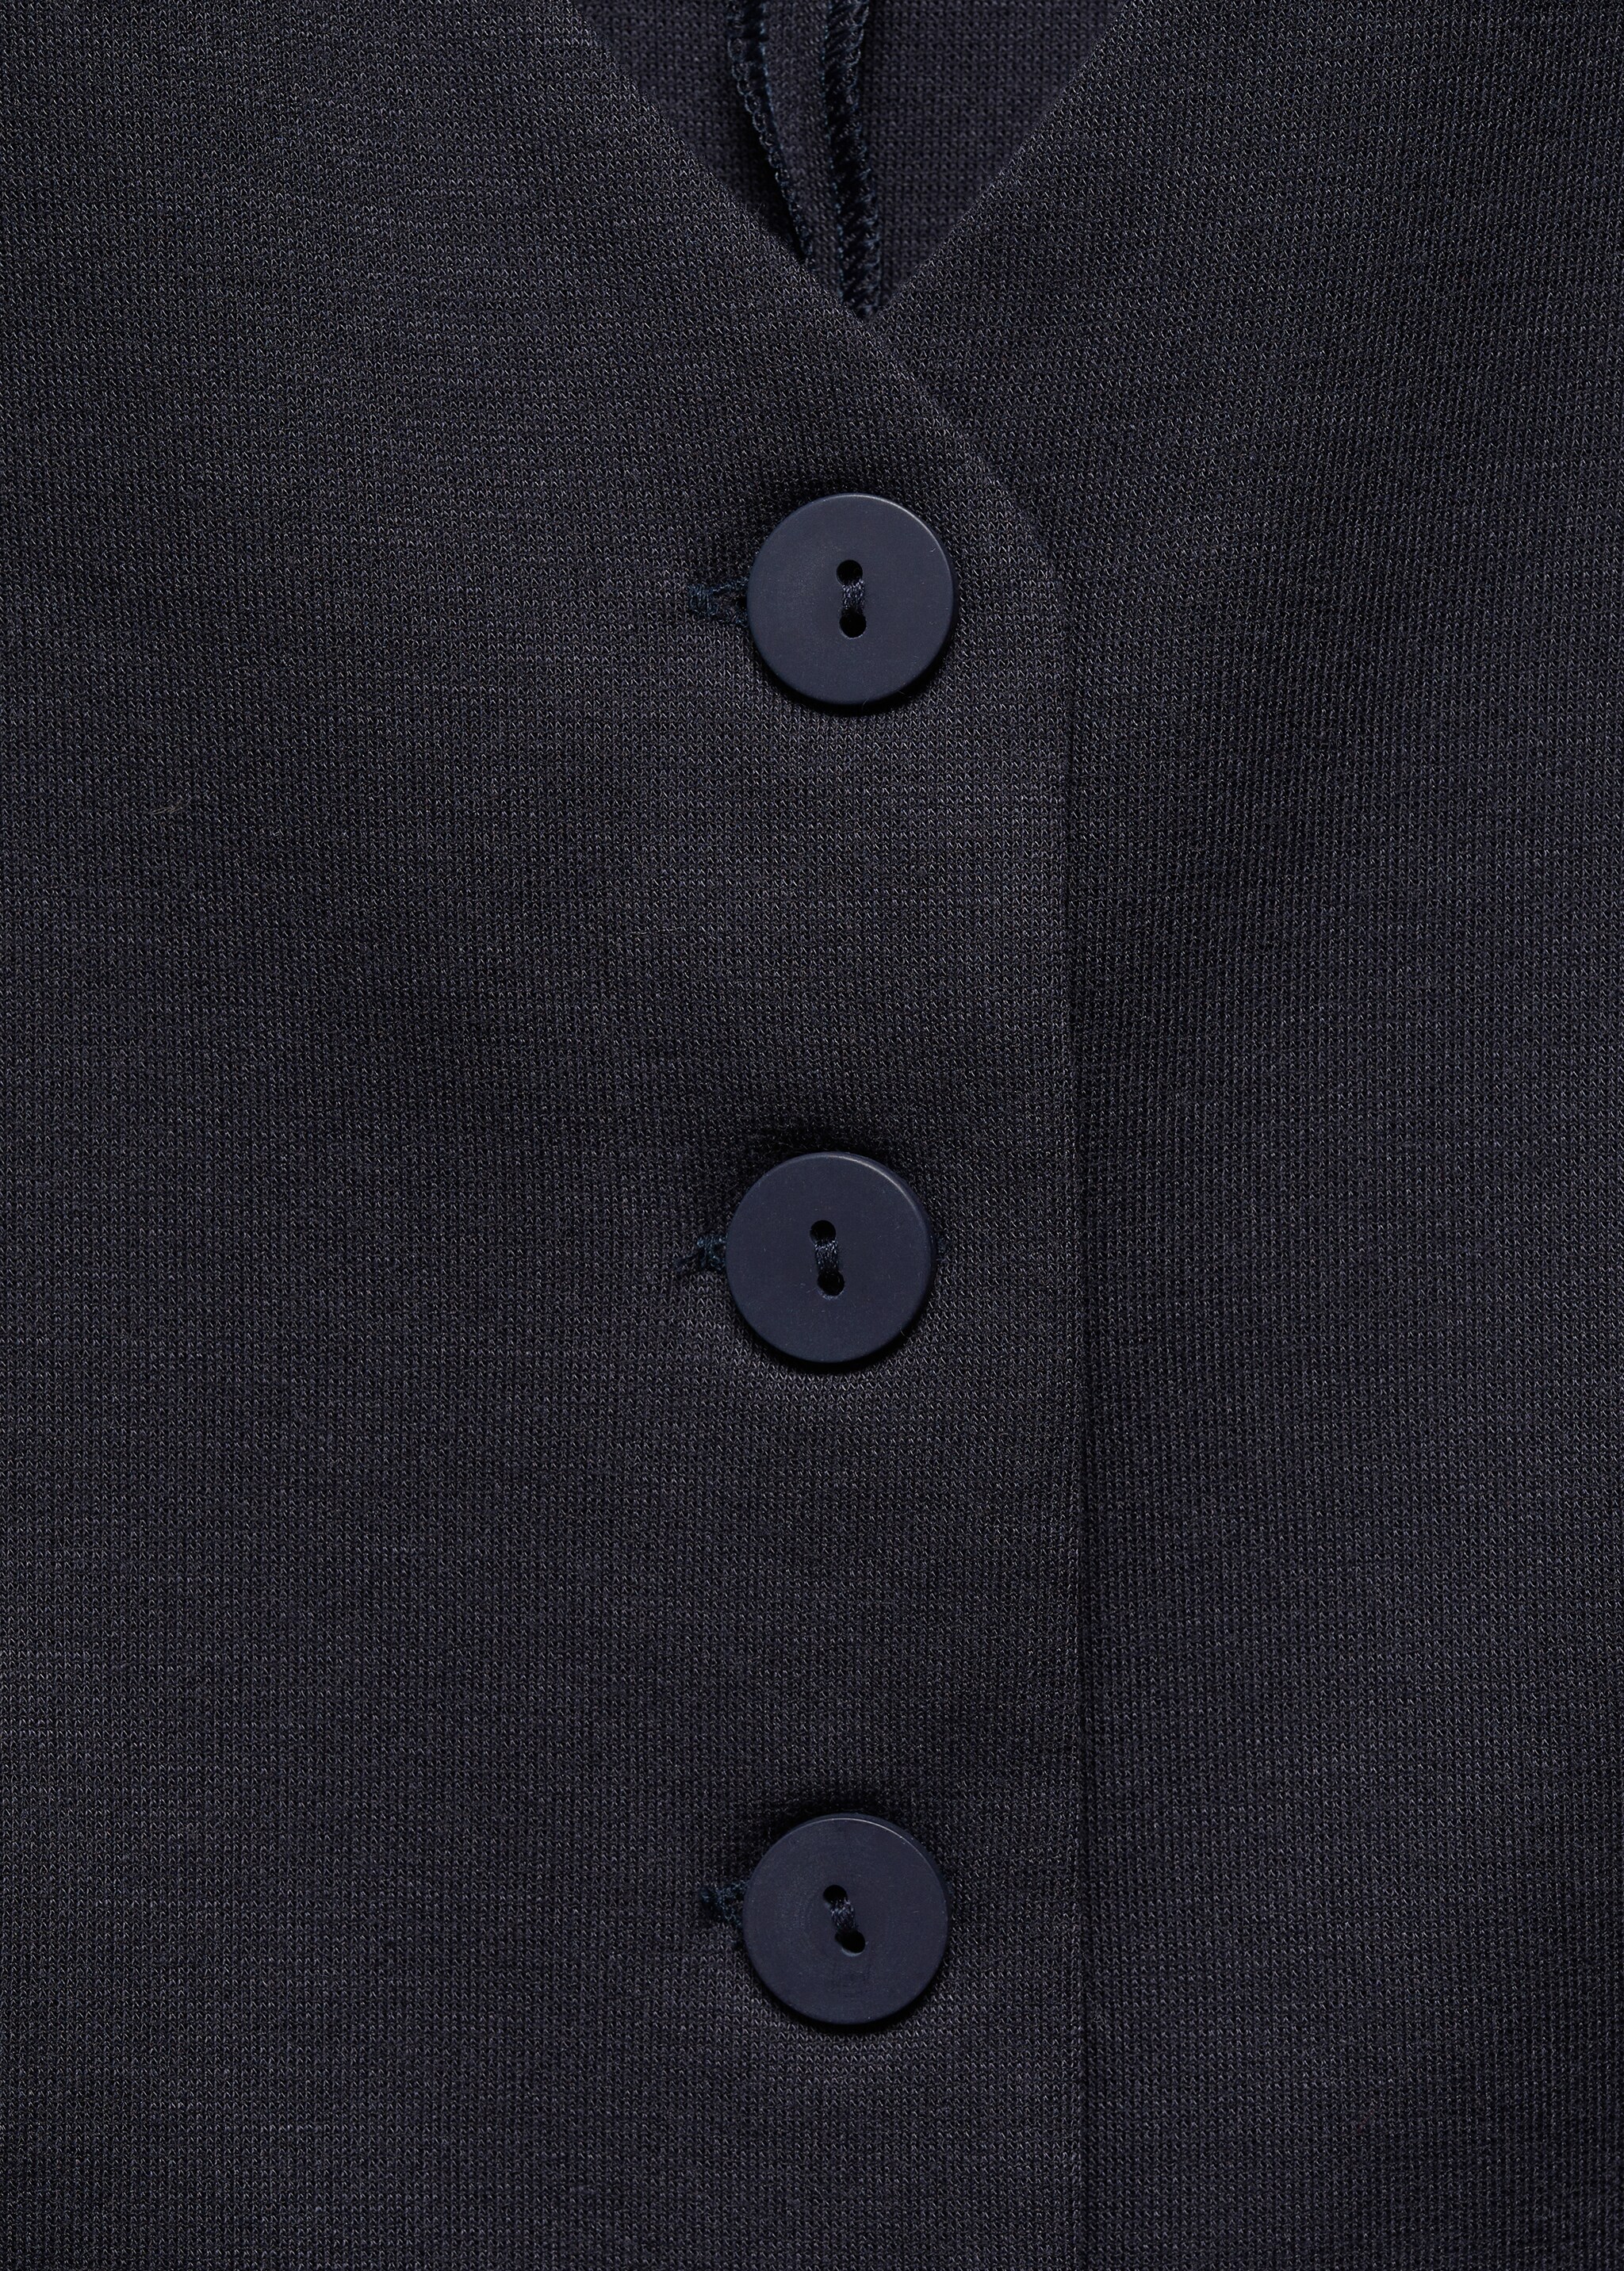 Gilet with buttons - Details of the article 8